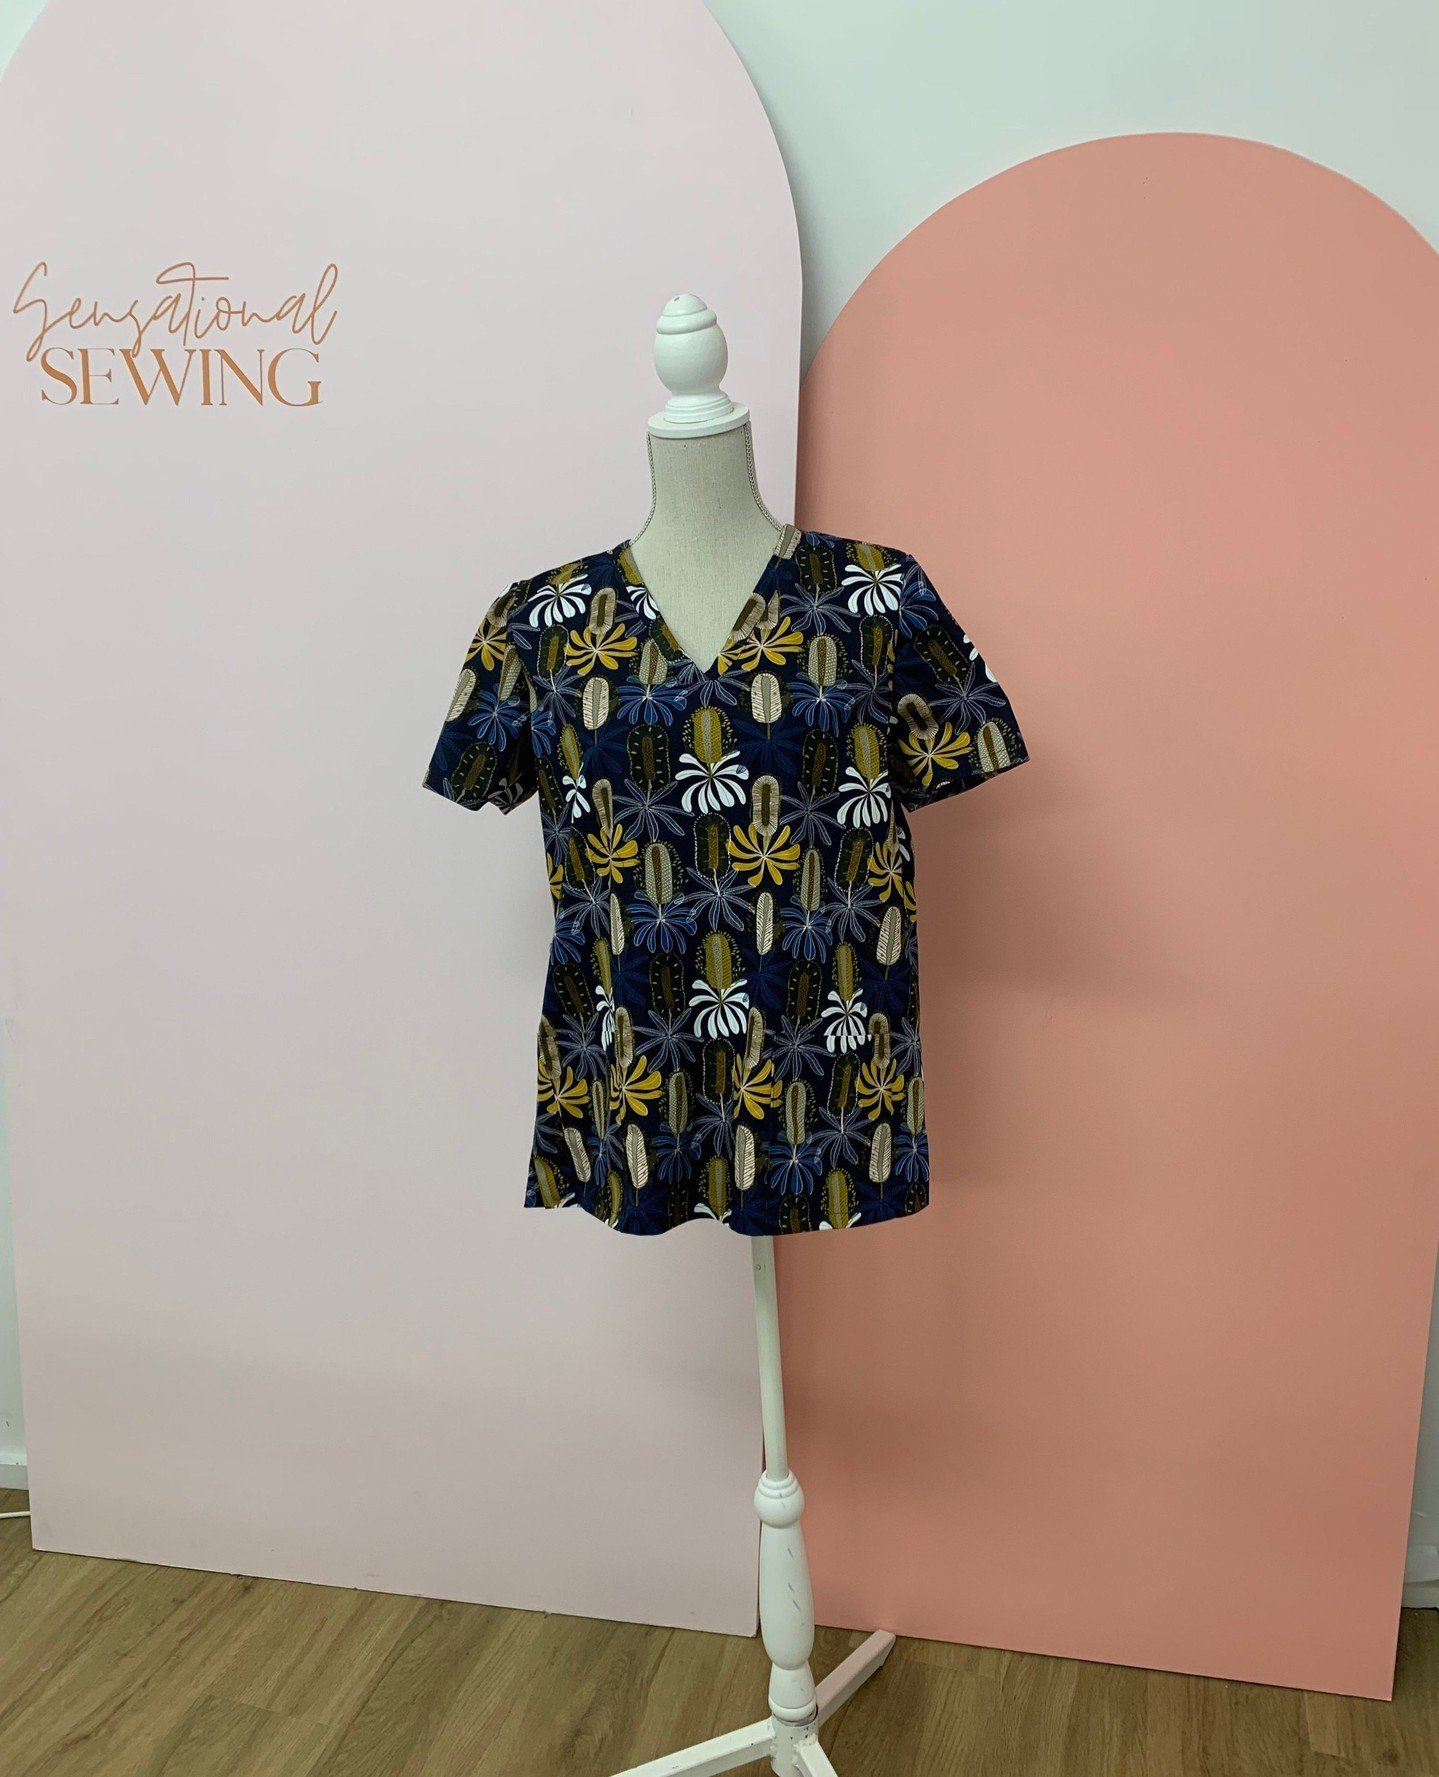 ✨️Sensational Sewing Showcase✨️⁠
Yesterday was International Nurses day and to celebrate the wonderful work nurses do each and every day we're sharing one of our favorite sewing projects we see in some of our classes...custom scrub tops!